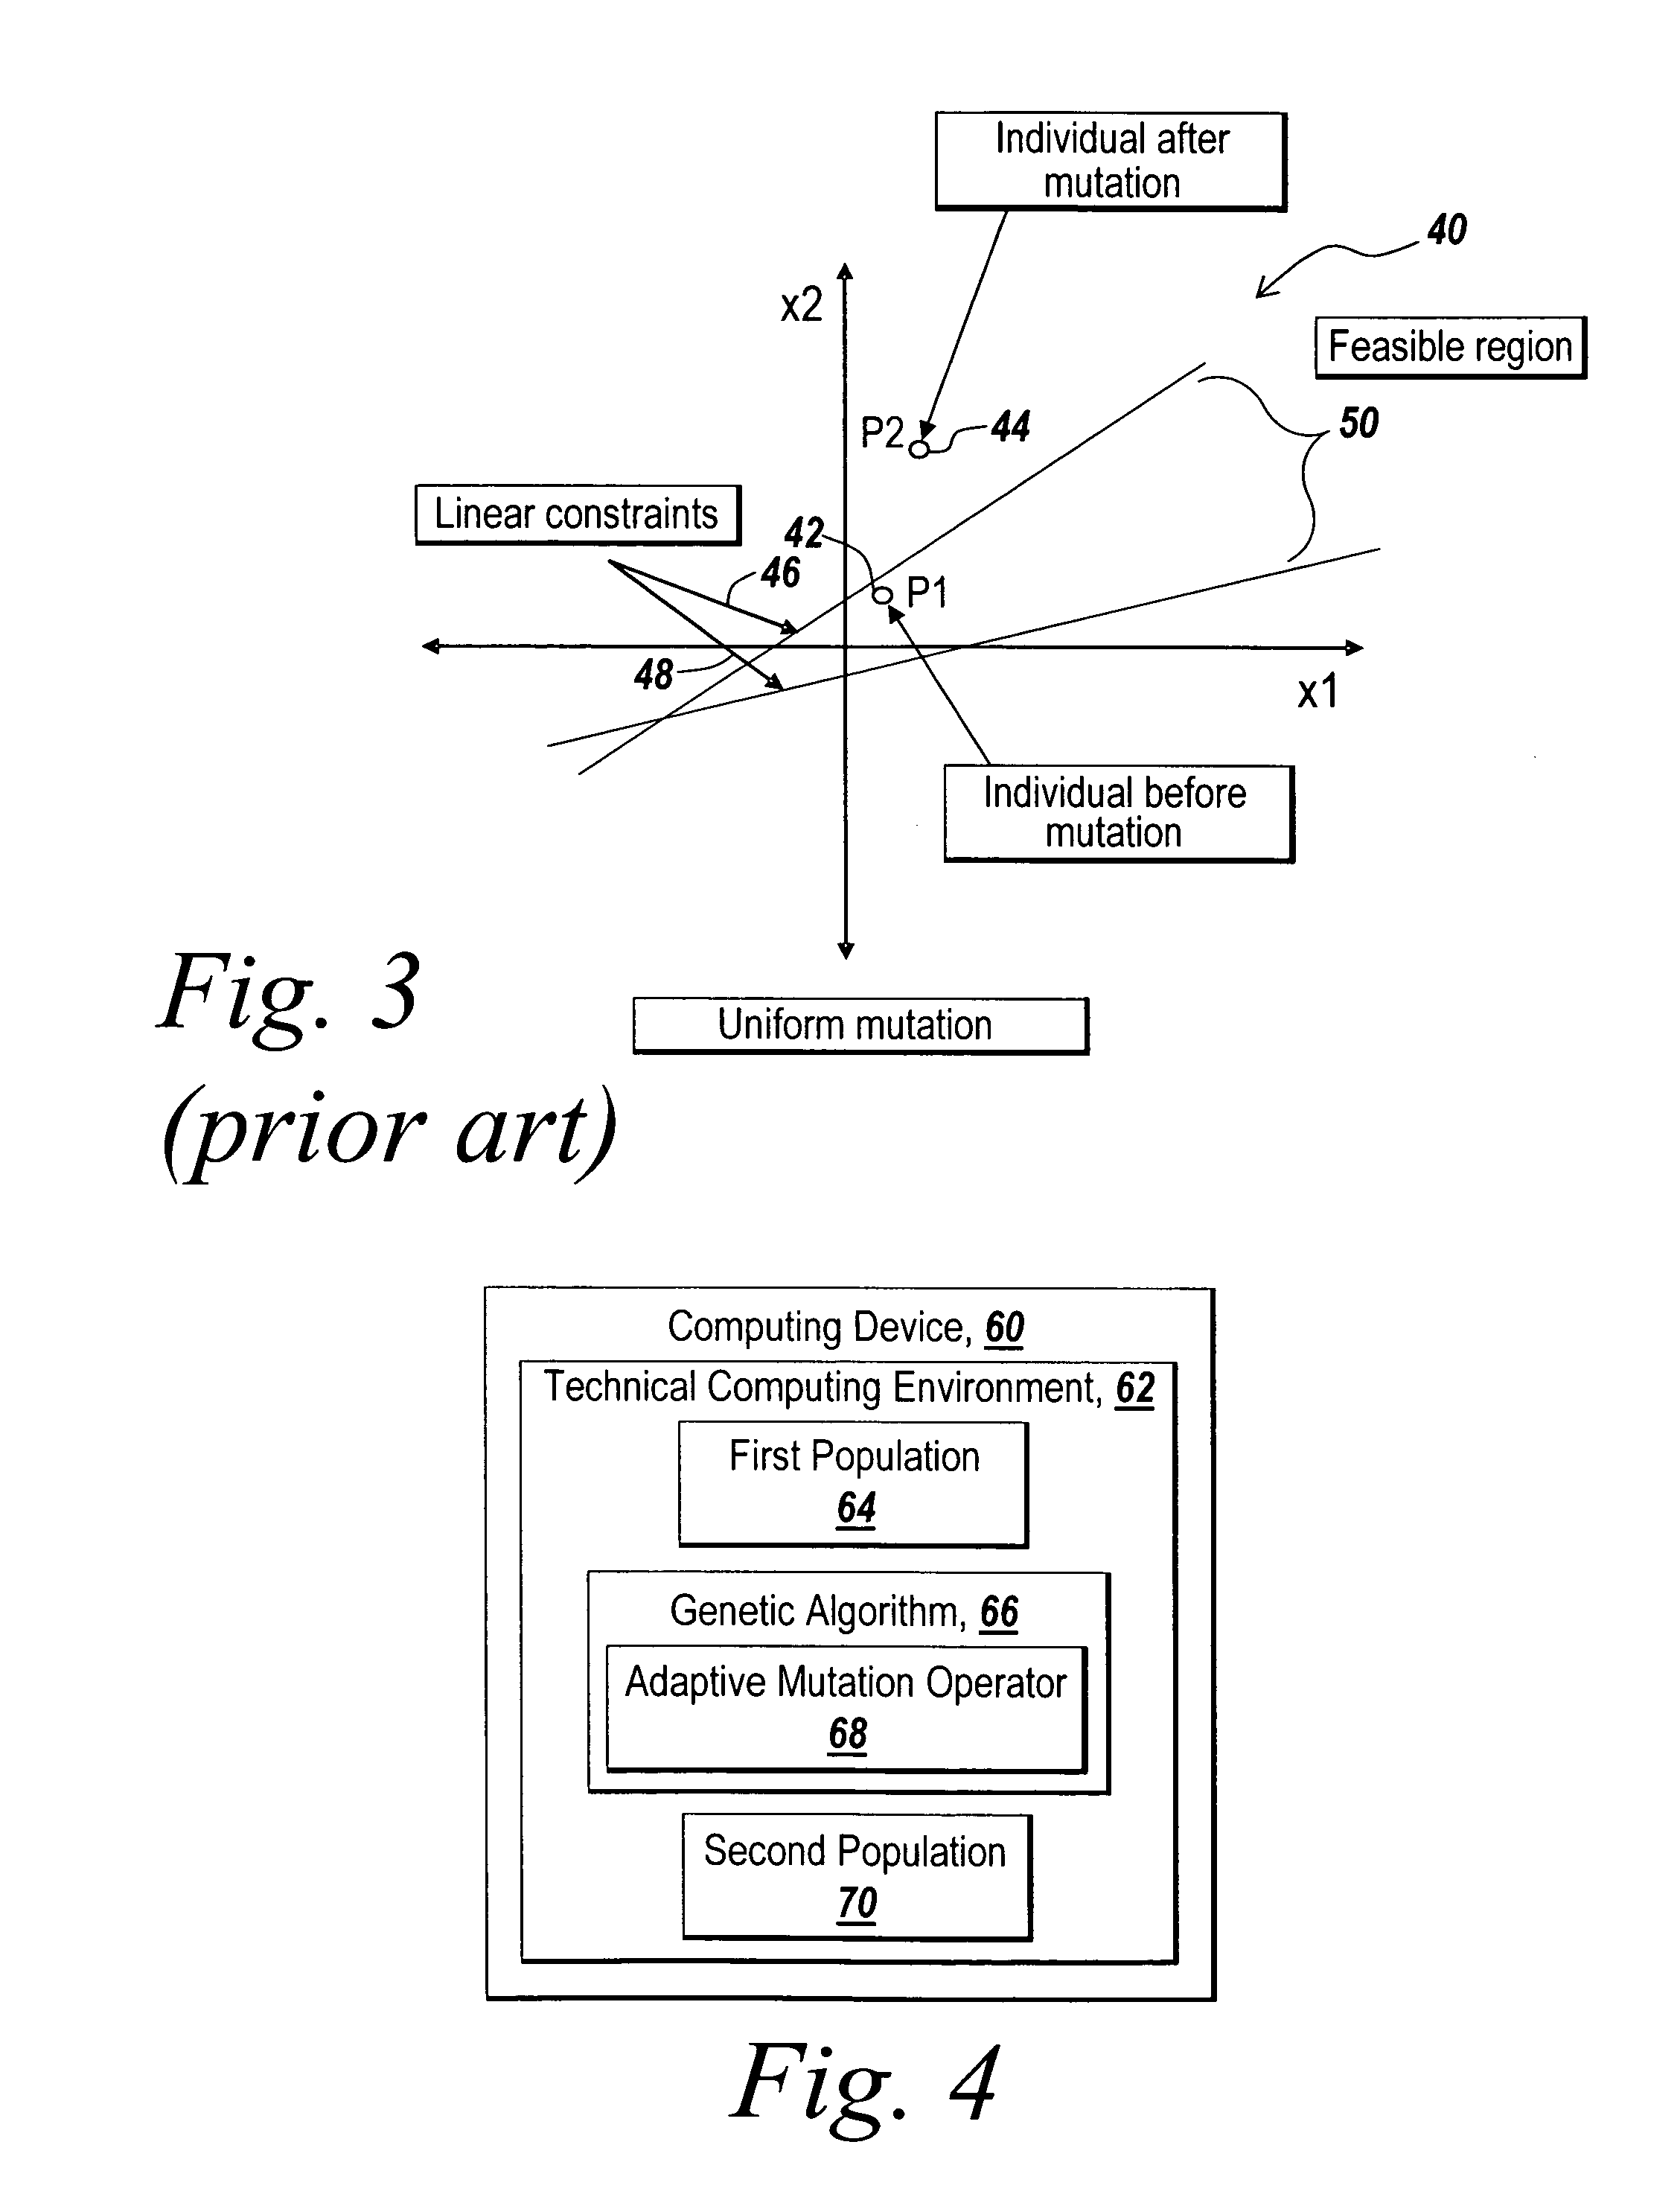 System and method for performing non-linear constrained optimization with a genetic algorithm